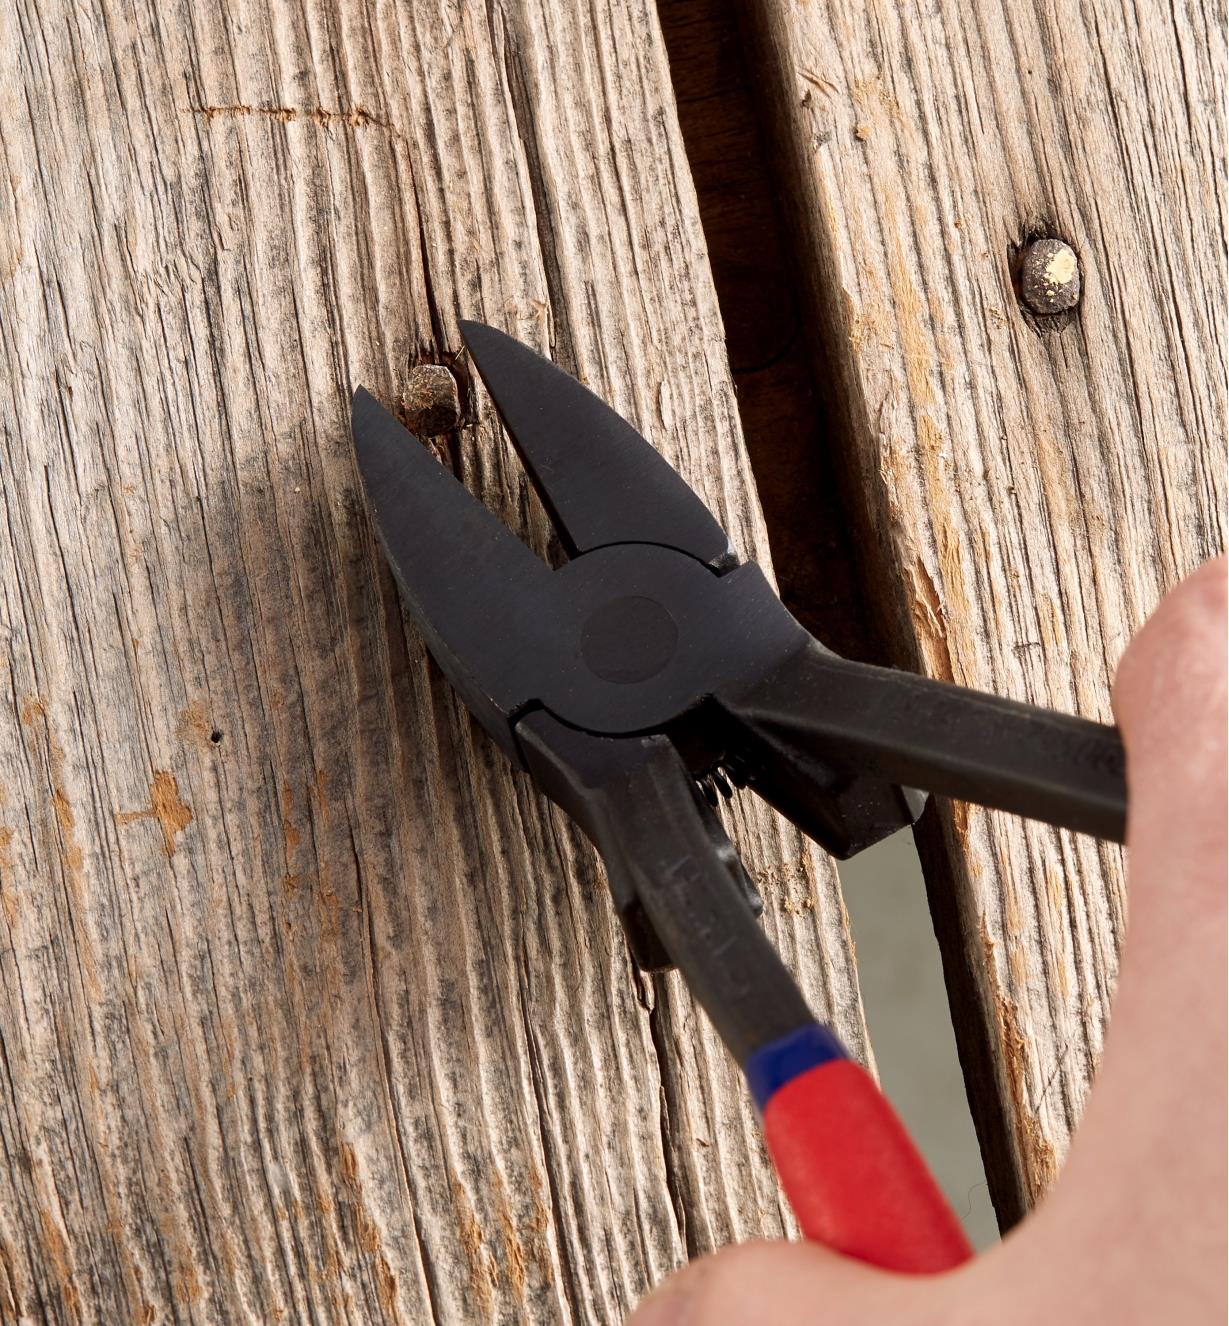 Removing a nail from a wall with the Nail Hunter